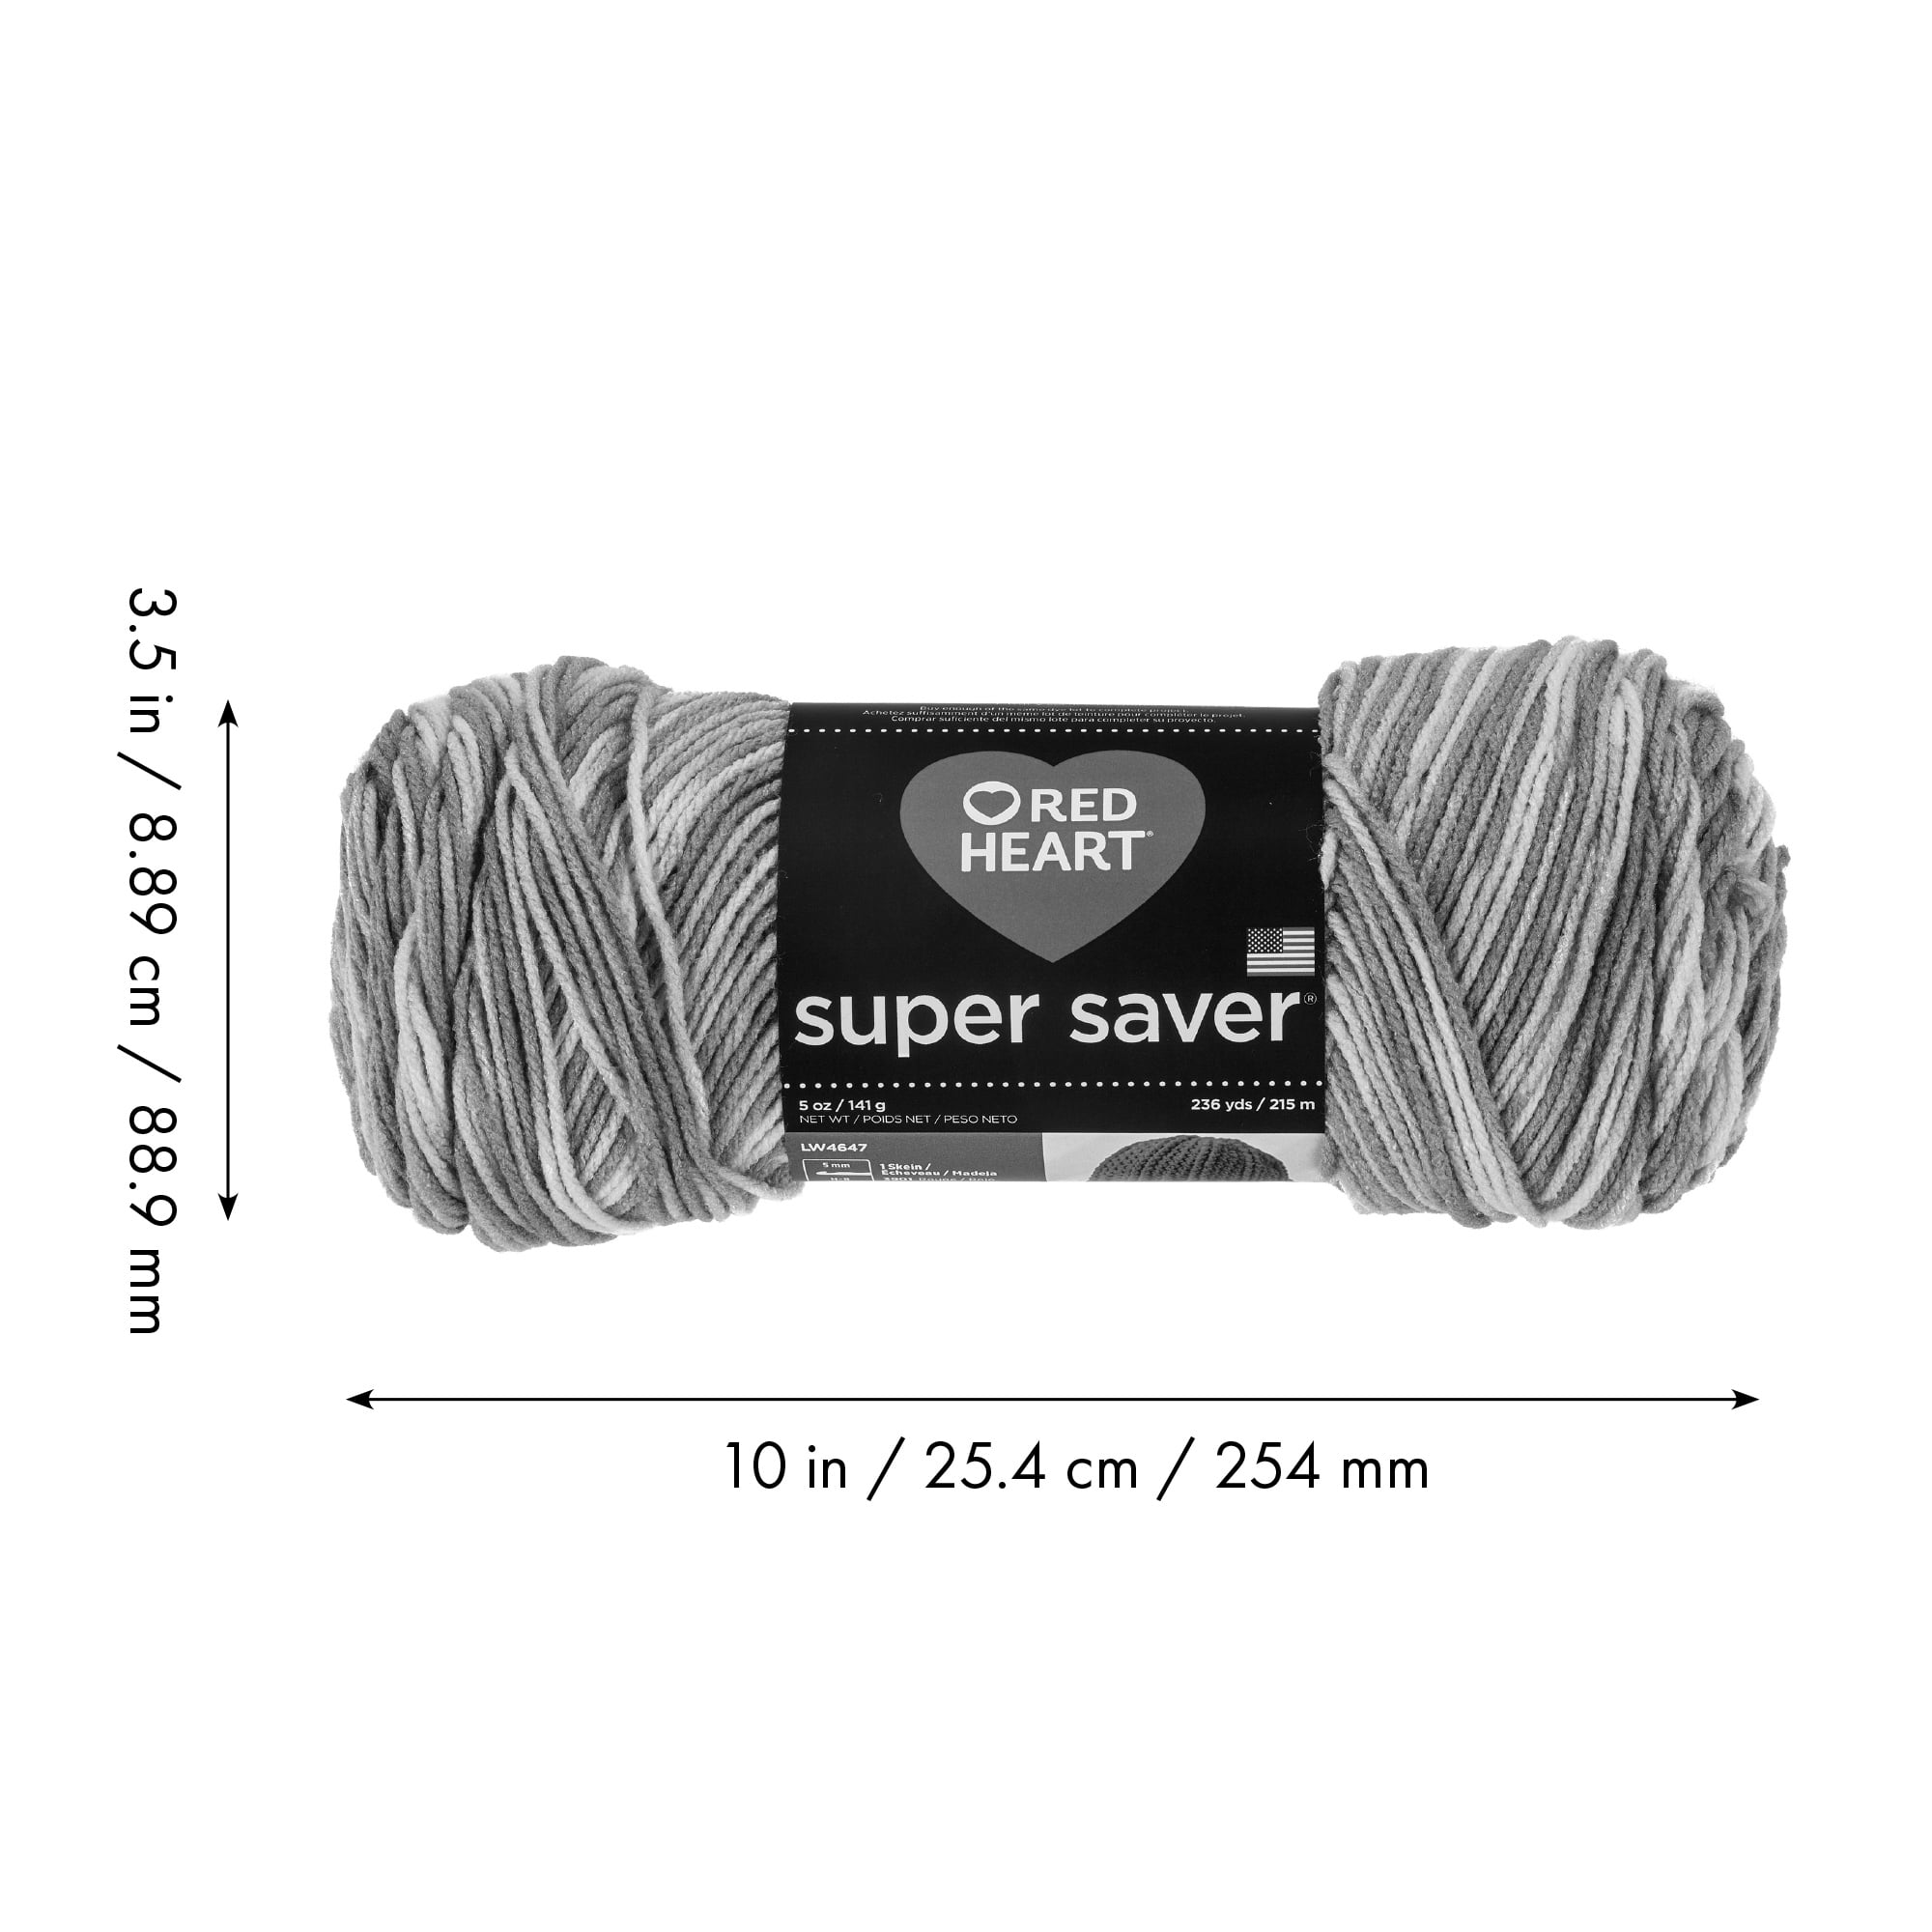 x4 Red Heart Super Saver Yarn (4-Pack of 5oz Skeins) Green Tones